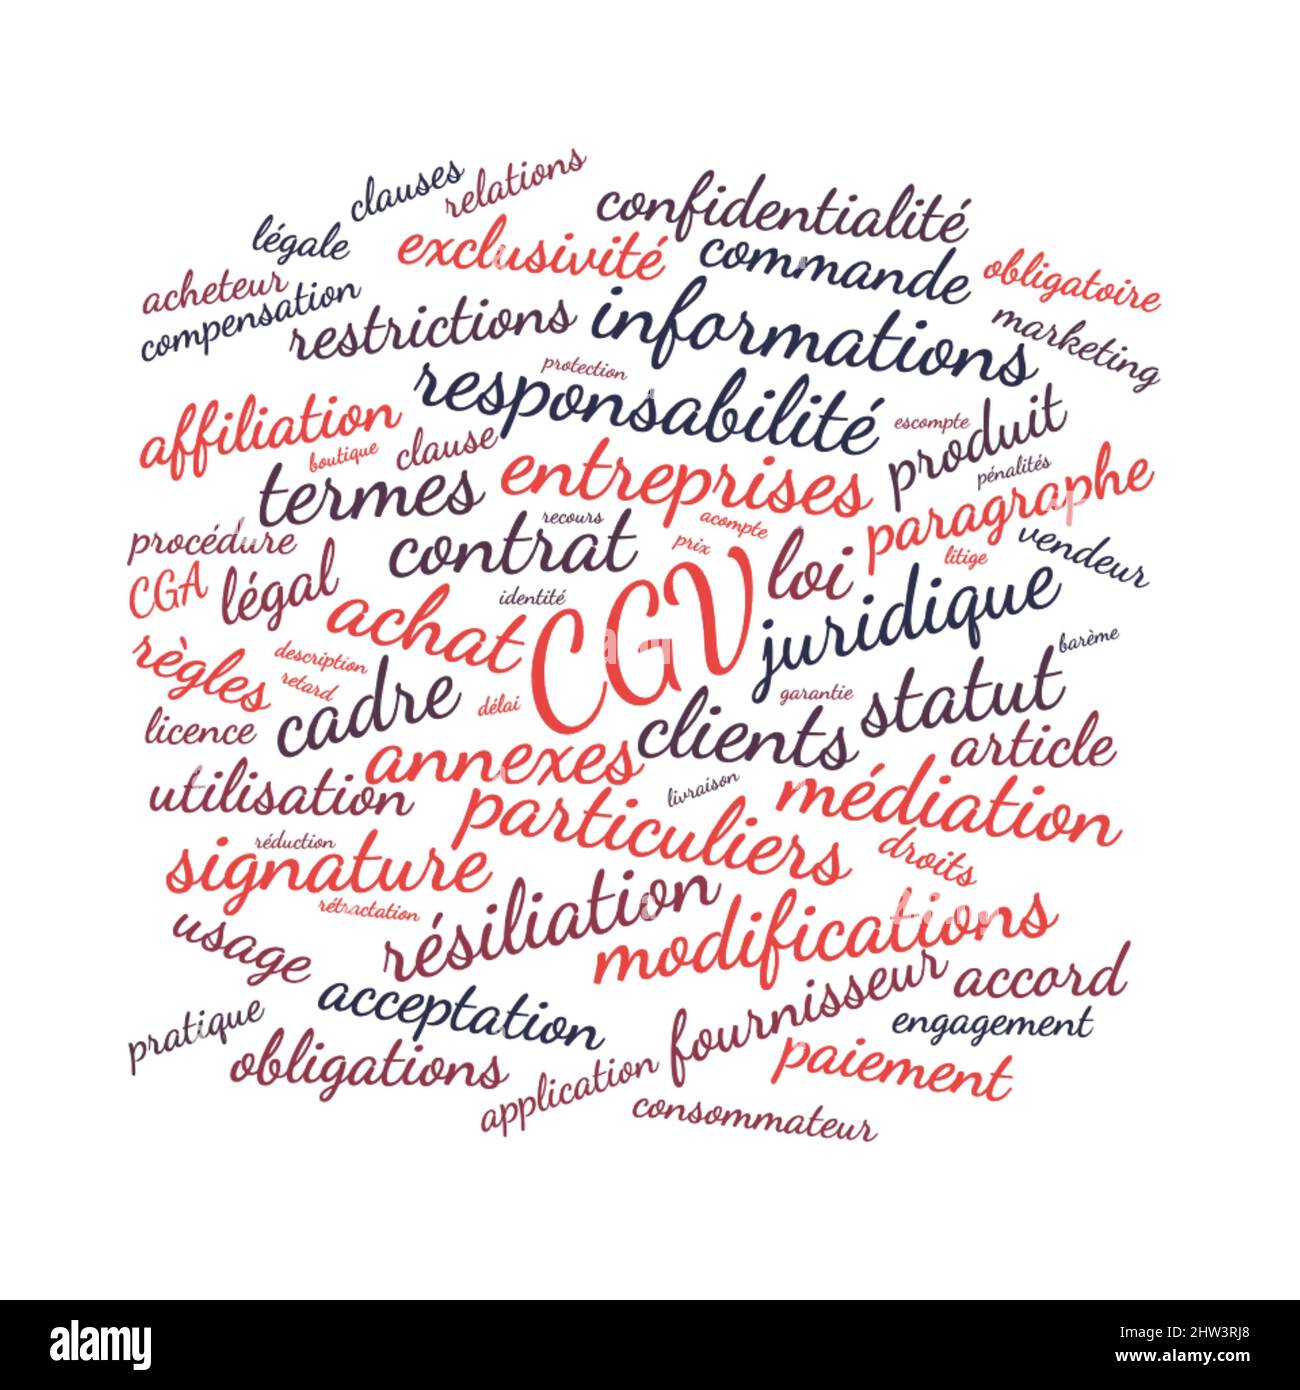 General Conditions word cloud vector illustration in French language ...